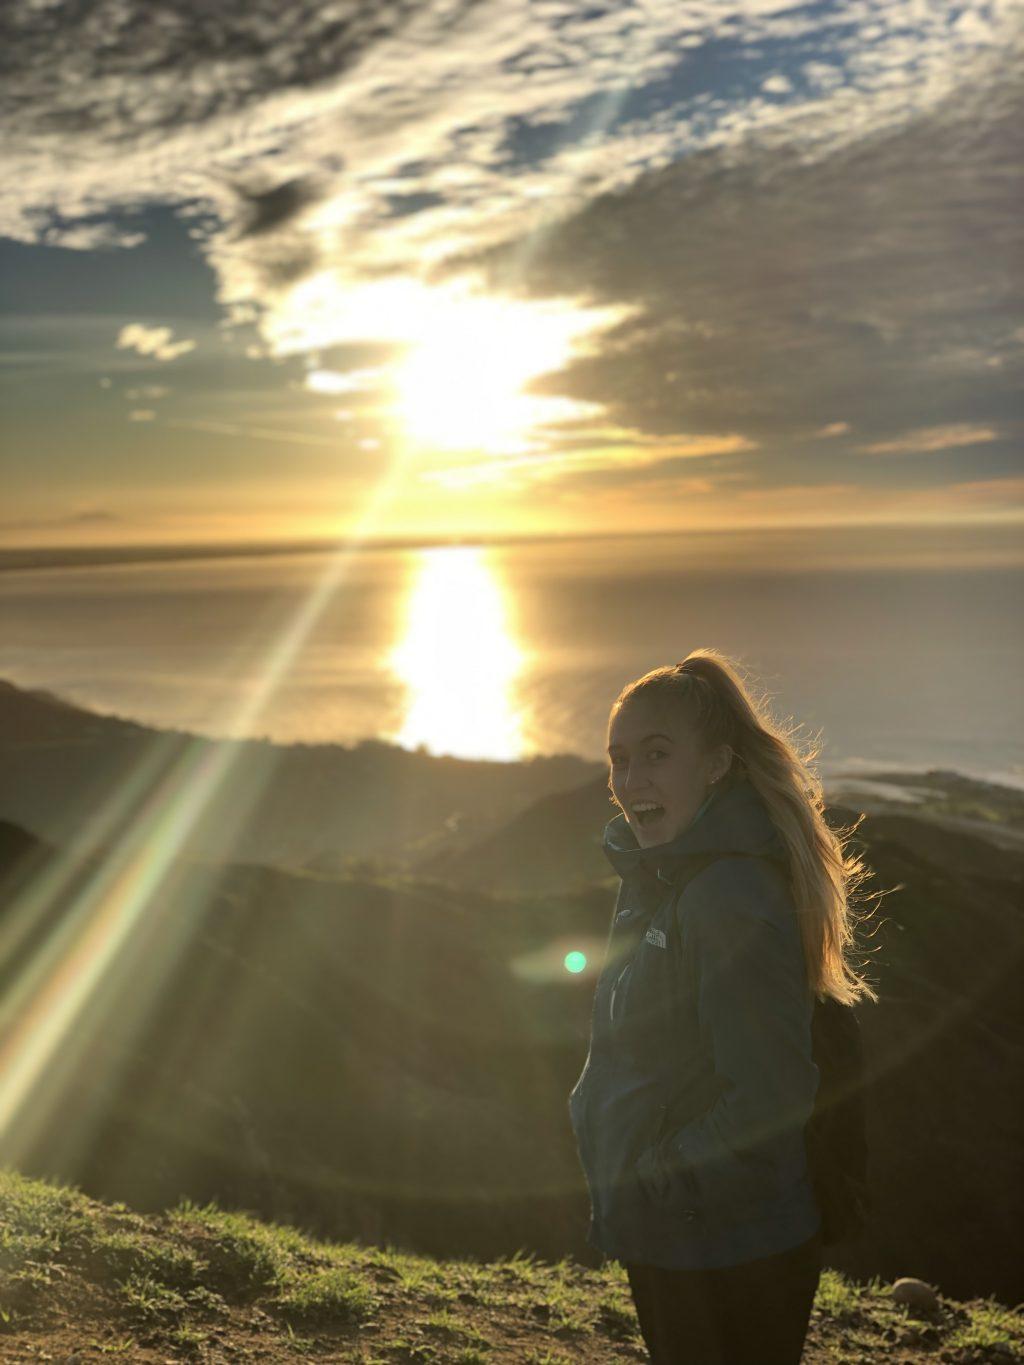 Morrison enjoys the ocean view during her hike to the Cross in Malibu in January 2019. She said loves to work out to relieve stress and get a break from schoolwork. Photo courtesy of Mackenzie Morrison